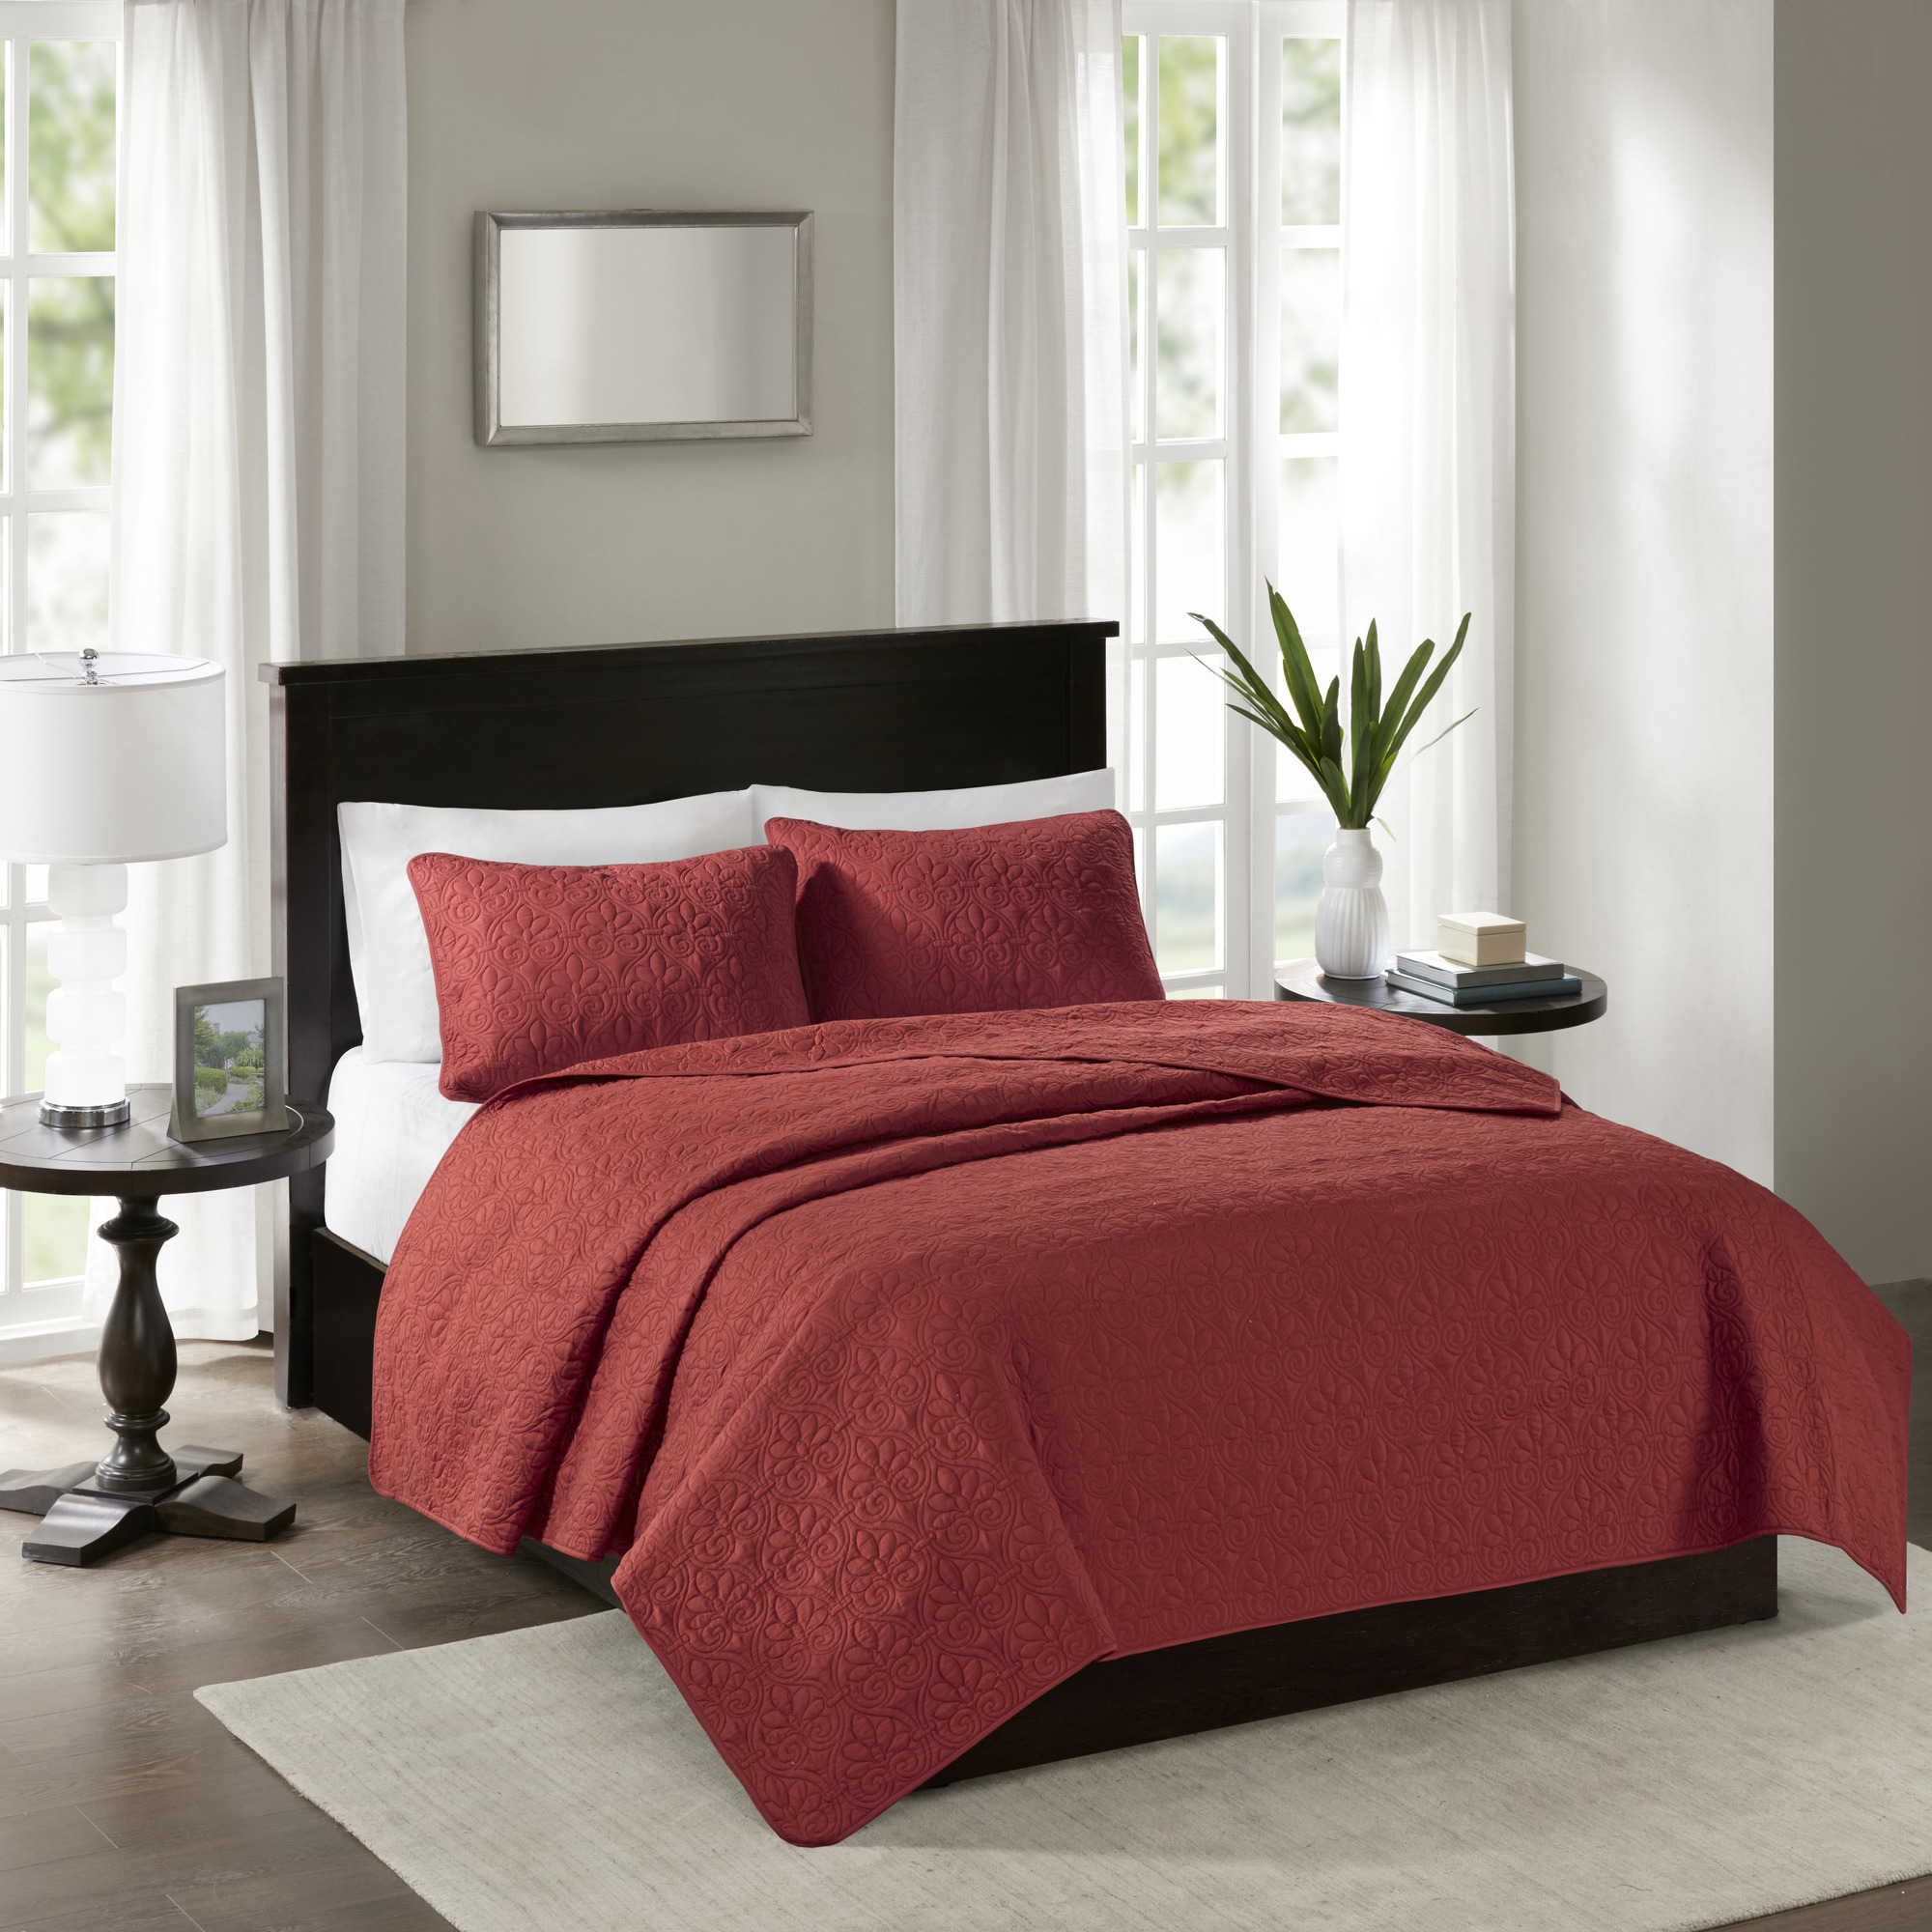 Home Essence Vancouver Super Soft Reversible Coverlet Set, Full/Queen, Red - image 3 of 13